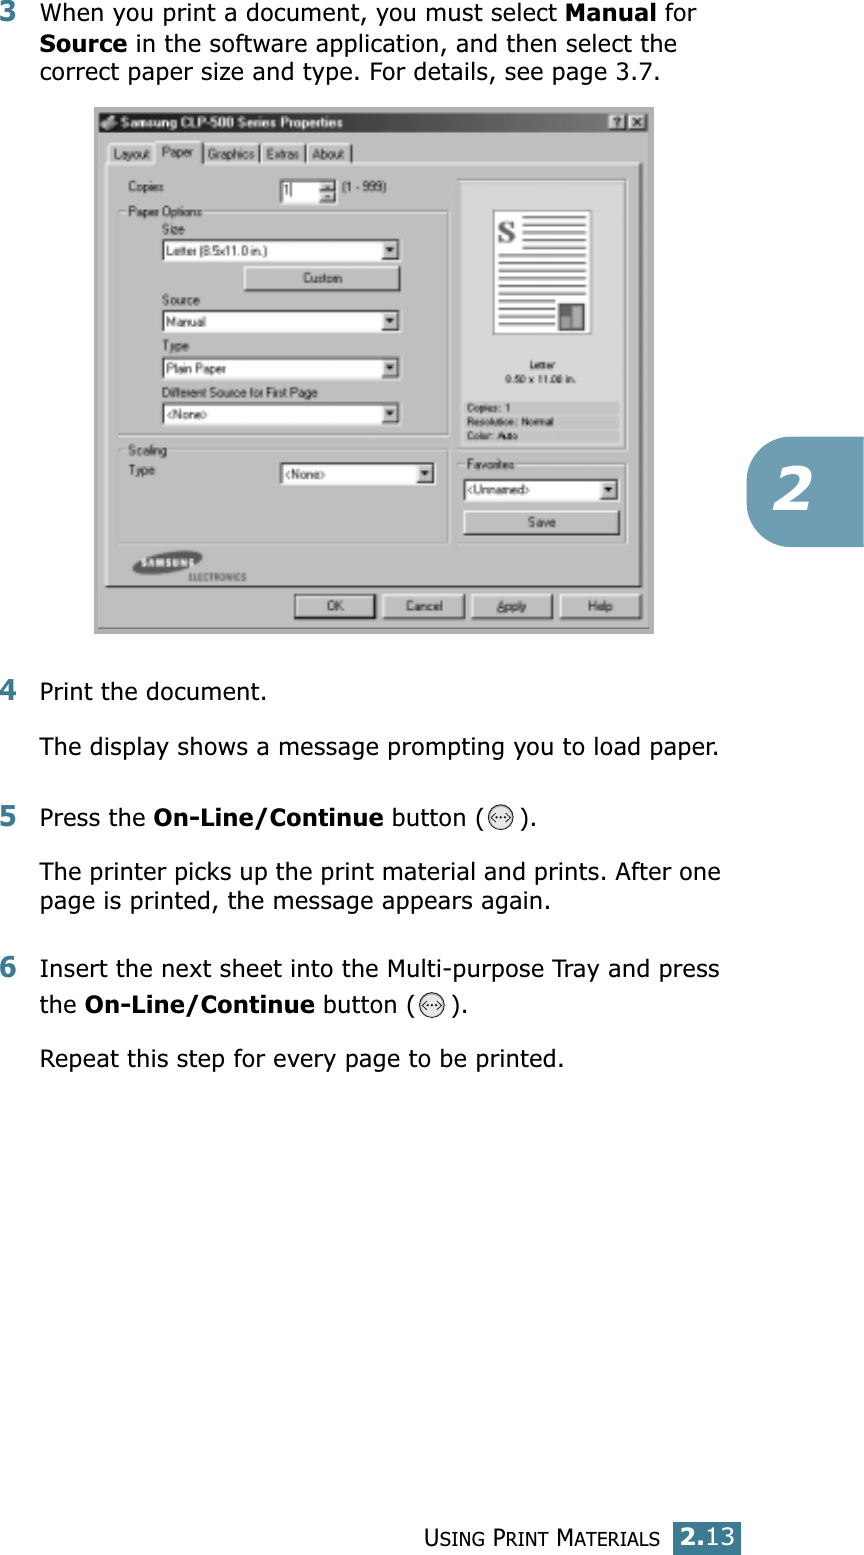 USING PRINT MATERIALS2.1323When you print a document, you must select Manual for Source in the software application, and then select the correct paper size and type. For details, see page 3.7. 4Print the document. The display shows a message prompting you to load paper. 5Press the On-Line/Continue button ( ). The printer picks up the print material and prints. After one page is printed, the message appears again.6Insert the next sheet into the Multi-purpose Tray and press the On-Line/Continue button ( ).Repeat this step for every page to be printed.